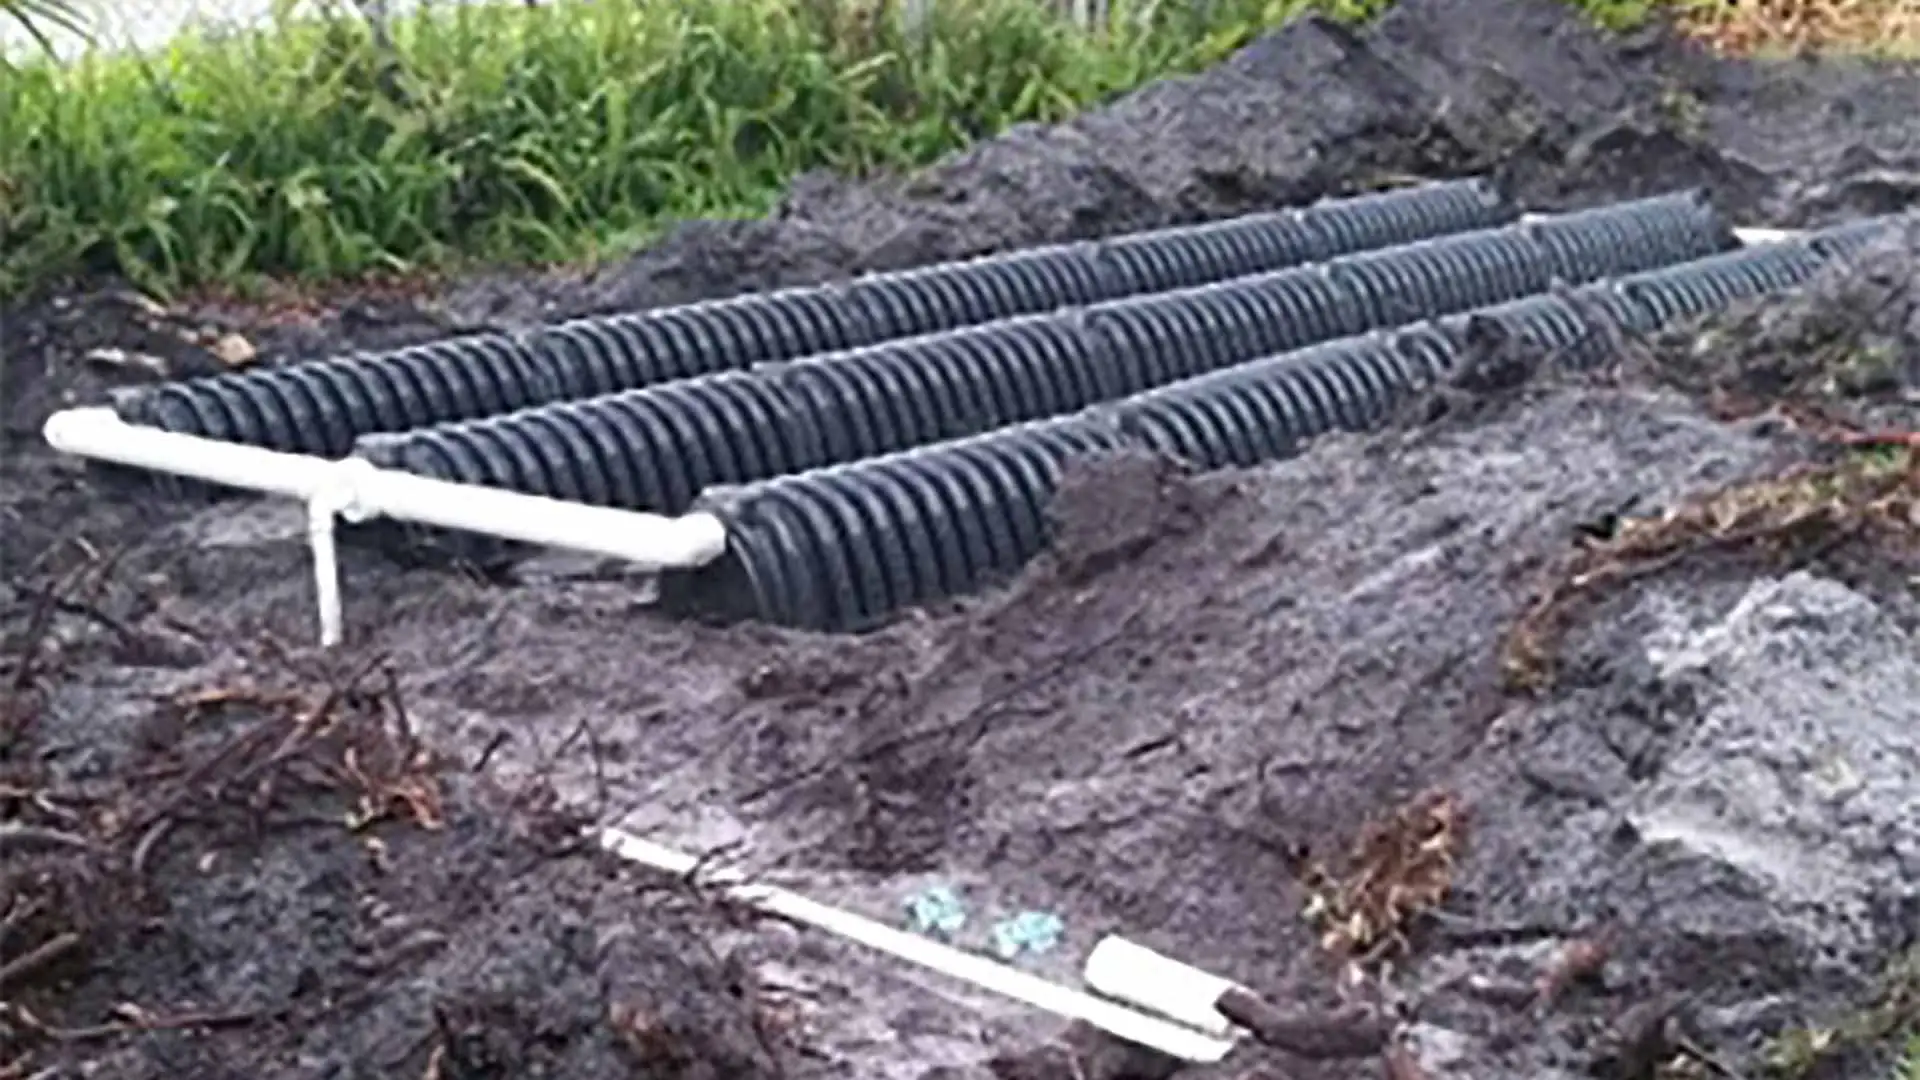 Our company provides the best in drain field repair services in Lakeland, FL and the surrounding areas.